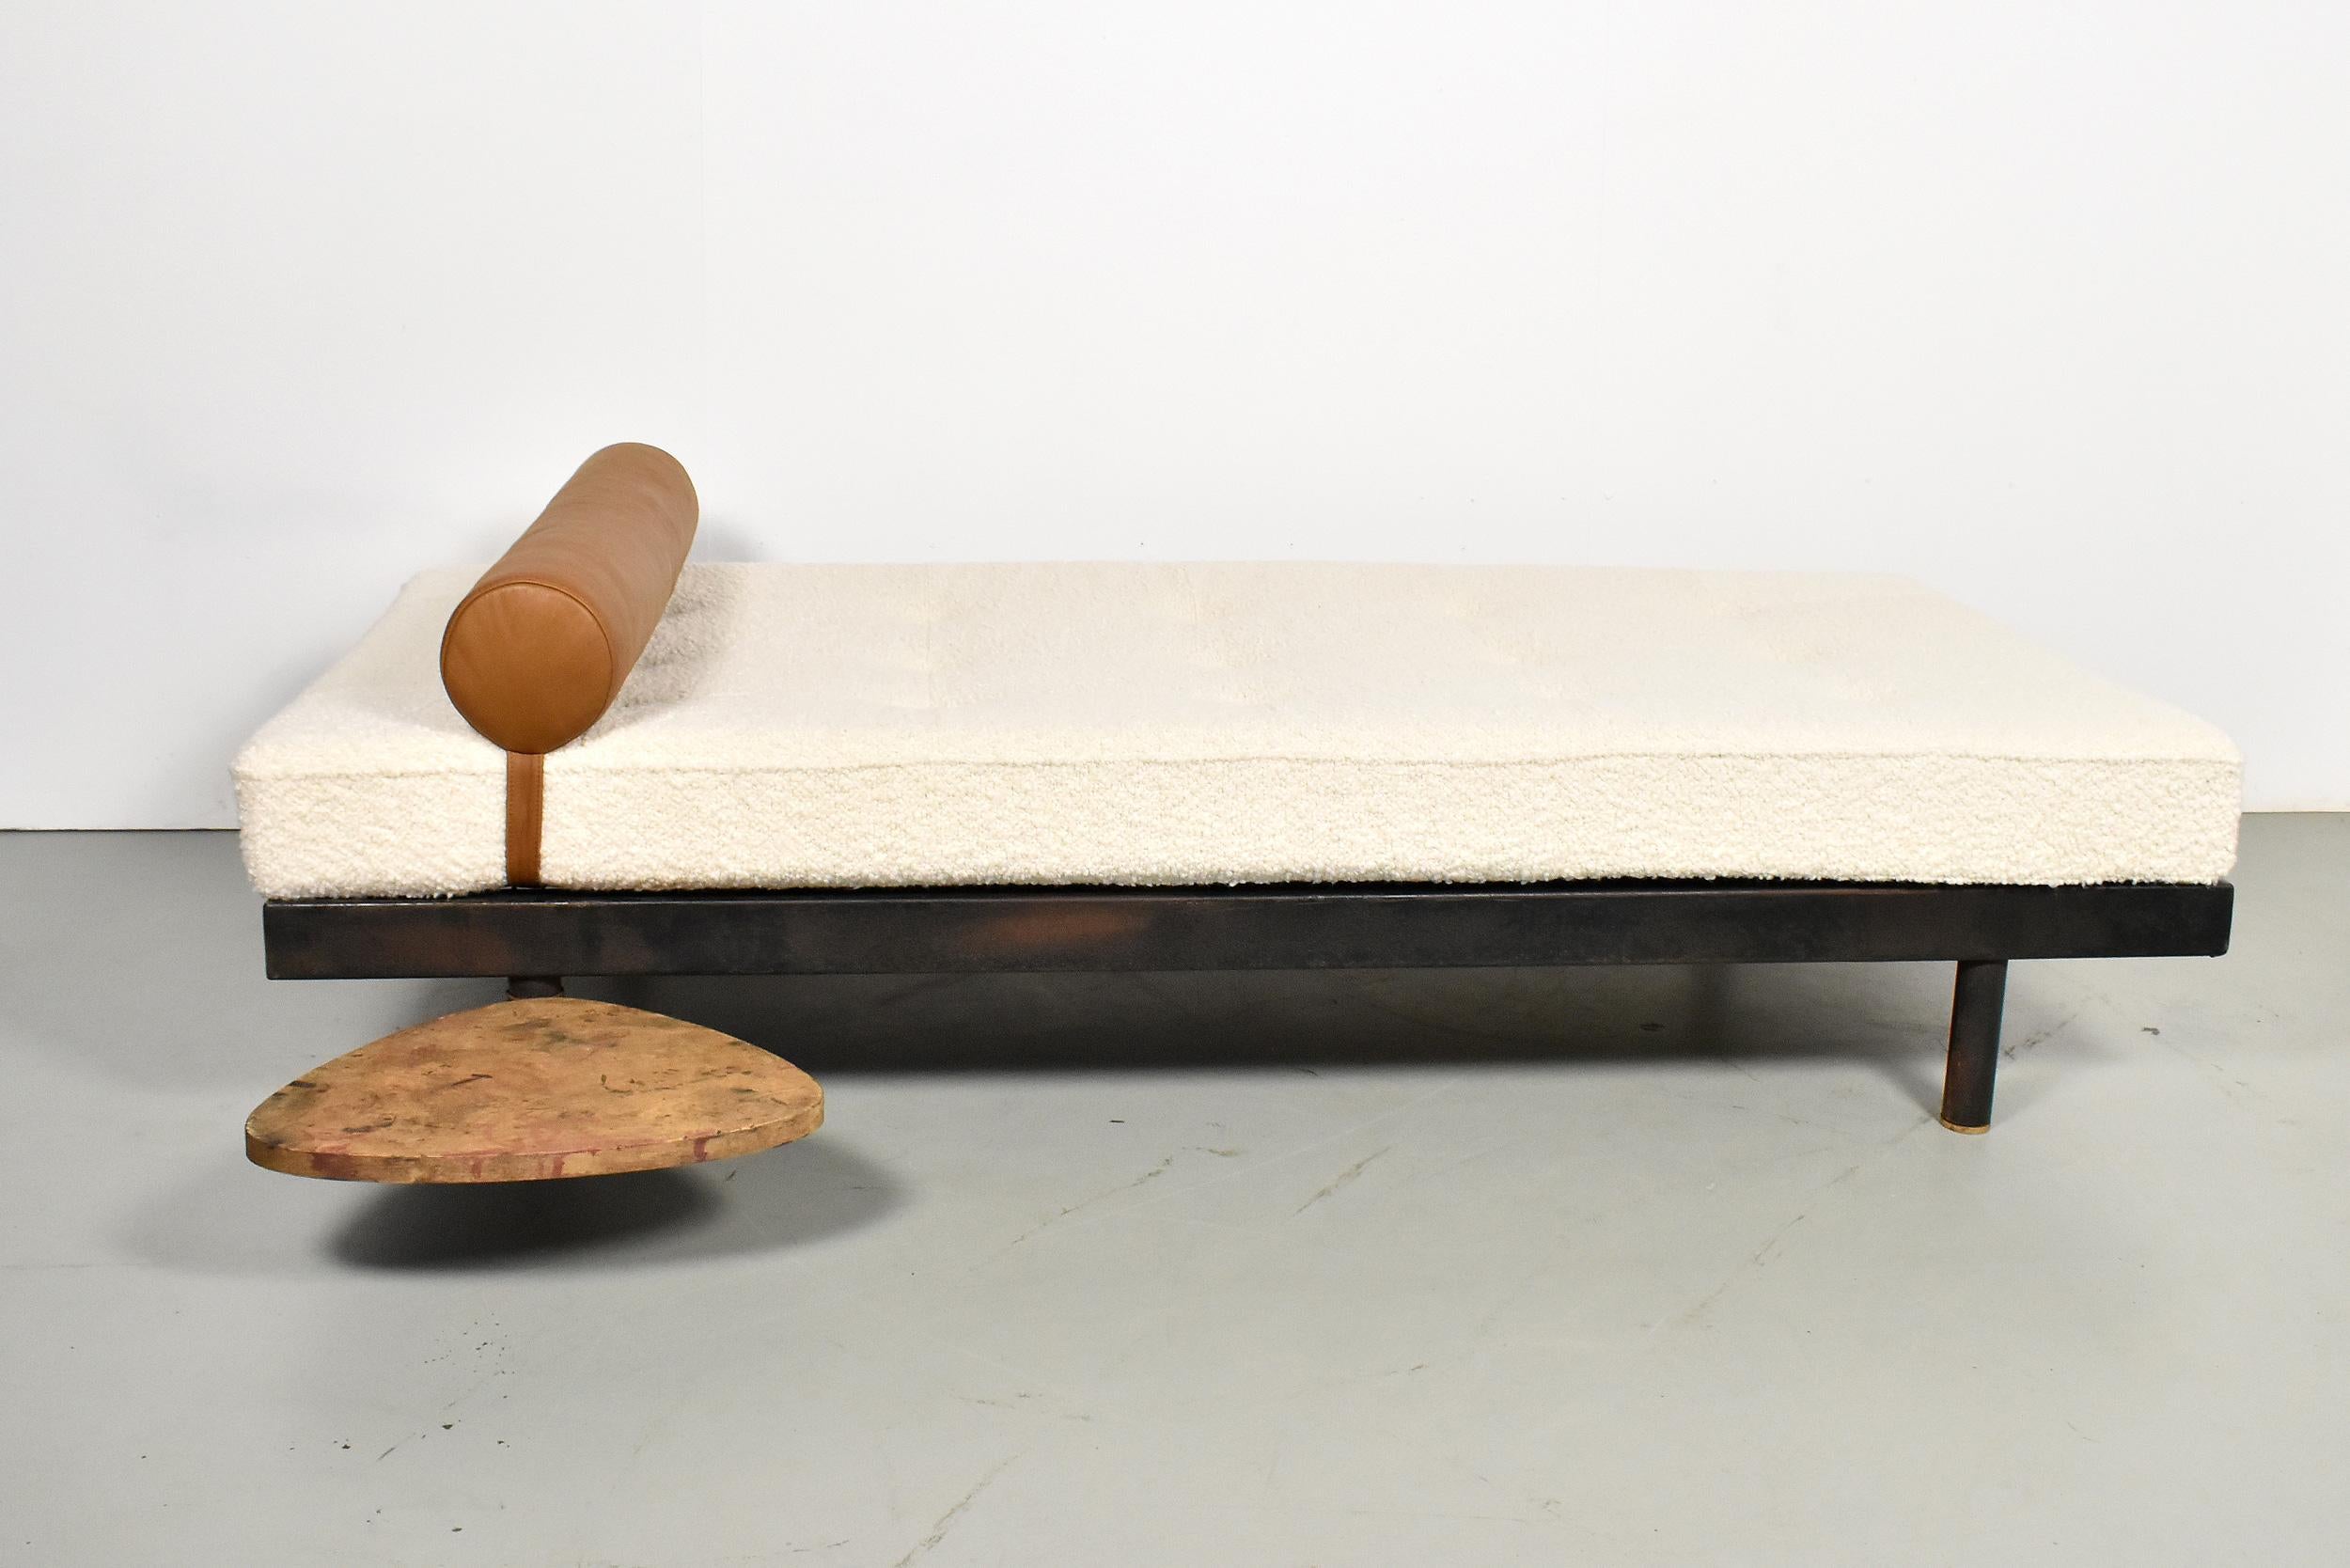 Daybed model S.C.A.L. Bed designed by Jean Prouvé from Atelier Prouve, Circa 1958. Structure in black painted bent sheet steel. The daybed has been fully restored with a new mattress completely re-upholstered in boucle fabric. The headrest has been